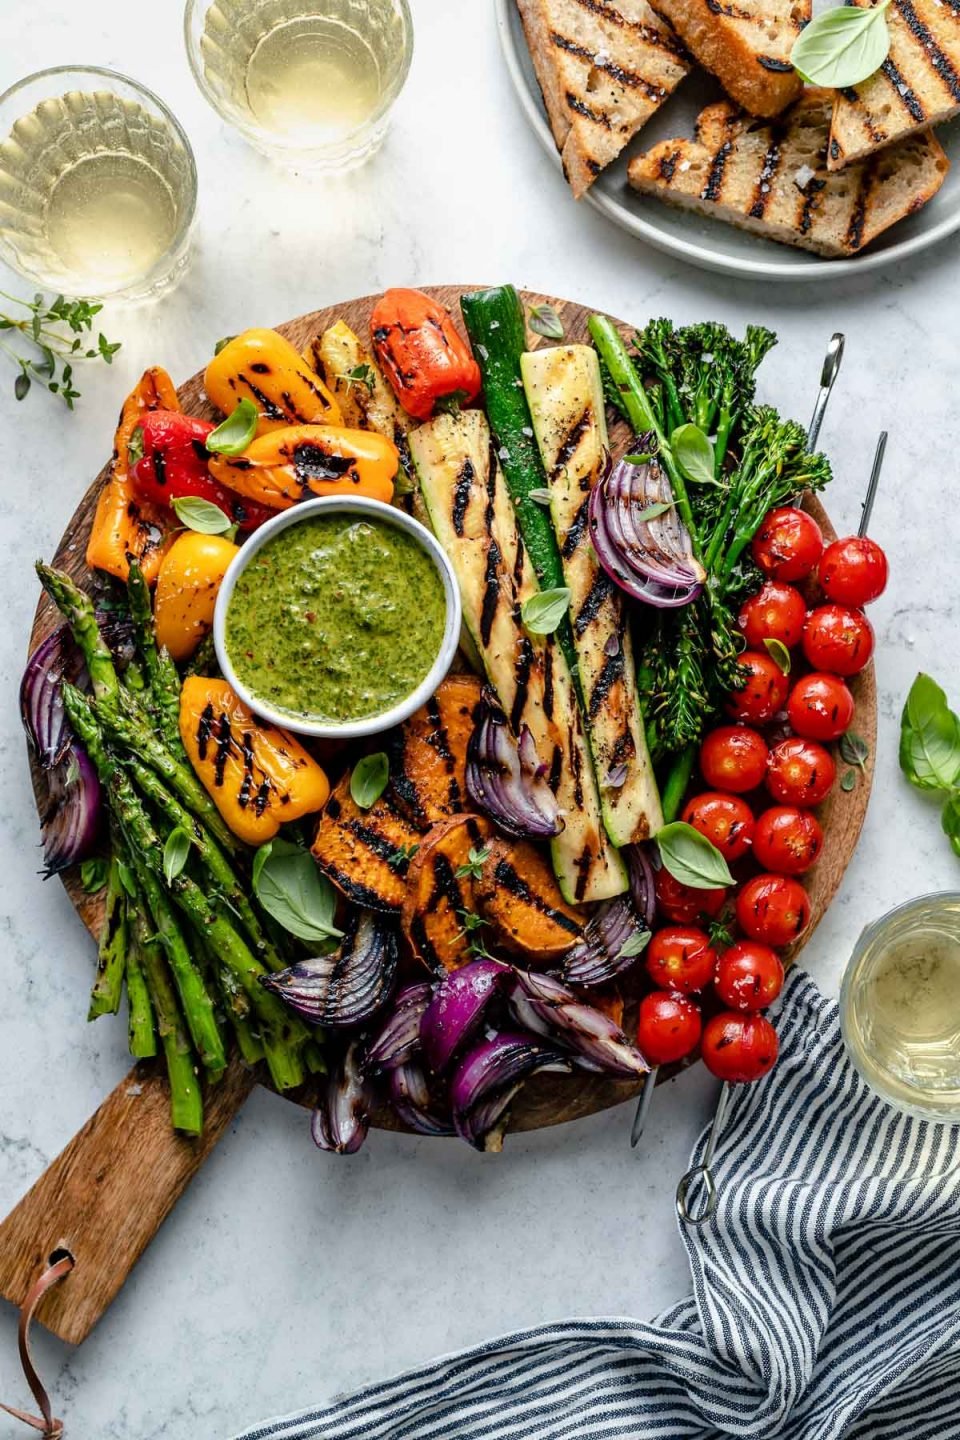 Grilled veggies including grilled cherry tomato skewers, grilled broccolini, grilled zucchini spears, grilled onion, grilled bell peppers, grilled sweet potatoes, & grilled asparagus are arranged on a round wooden cutting board for serving. The grilled veggies are garnished with fresh herbs & surround a small white bowl of chimichurri sauce for dipping that also rests on the cutting board. A white ceramic plate filled with grilled bread, three small glasses of white wine, fresh basil & herbs, a blue & white linen napkin surround the cutting board. All serving ware sits on top of a blue & white marbled surface.